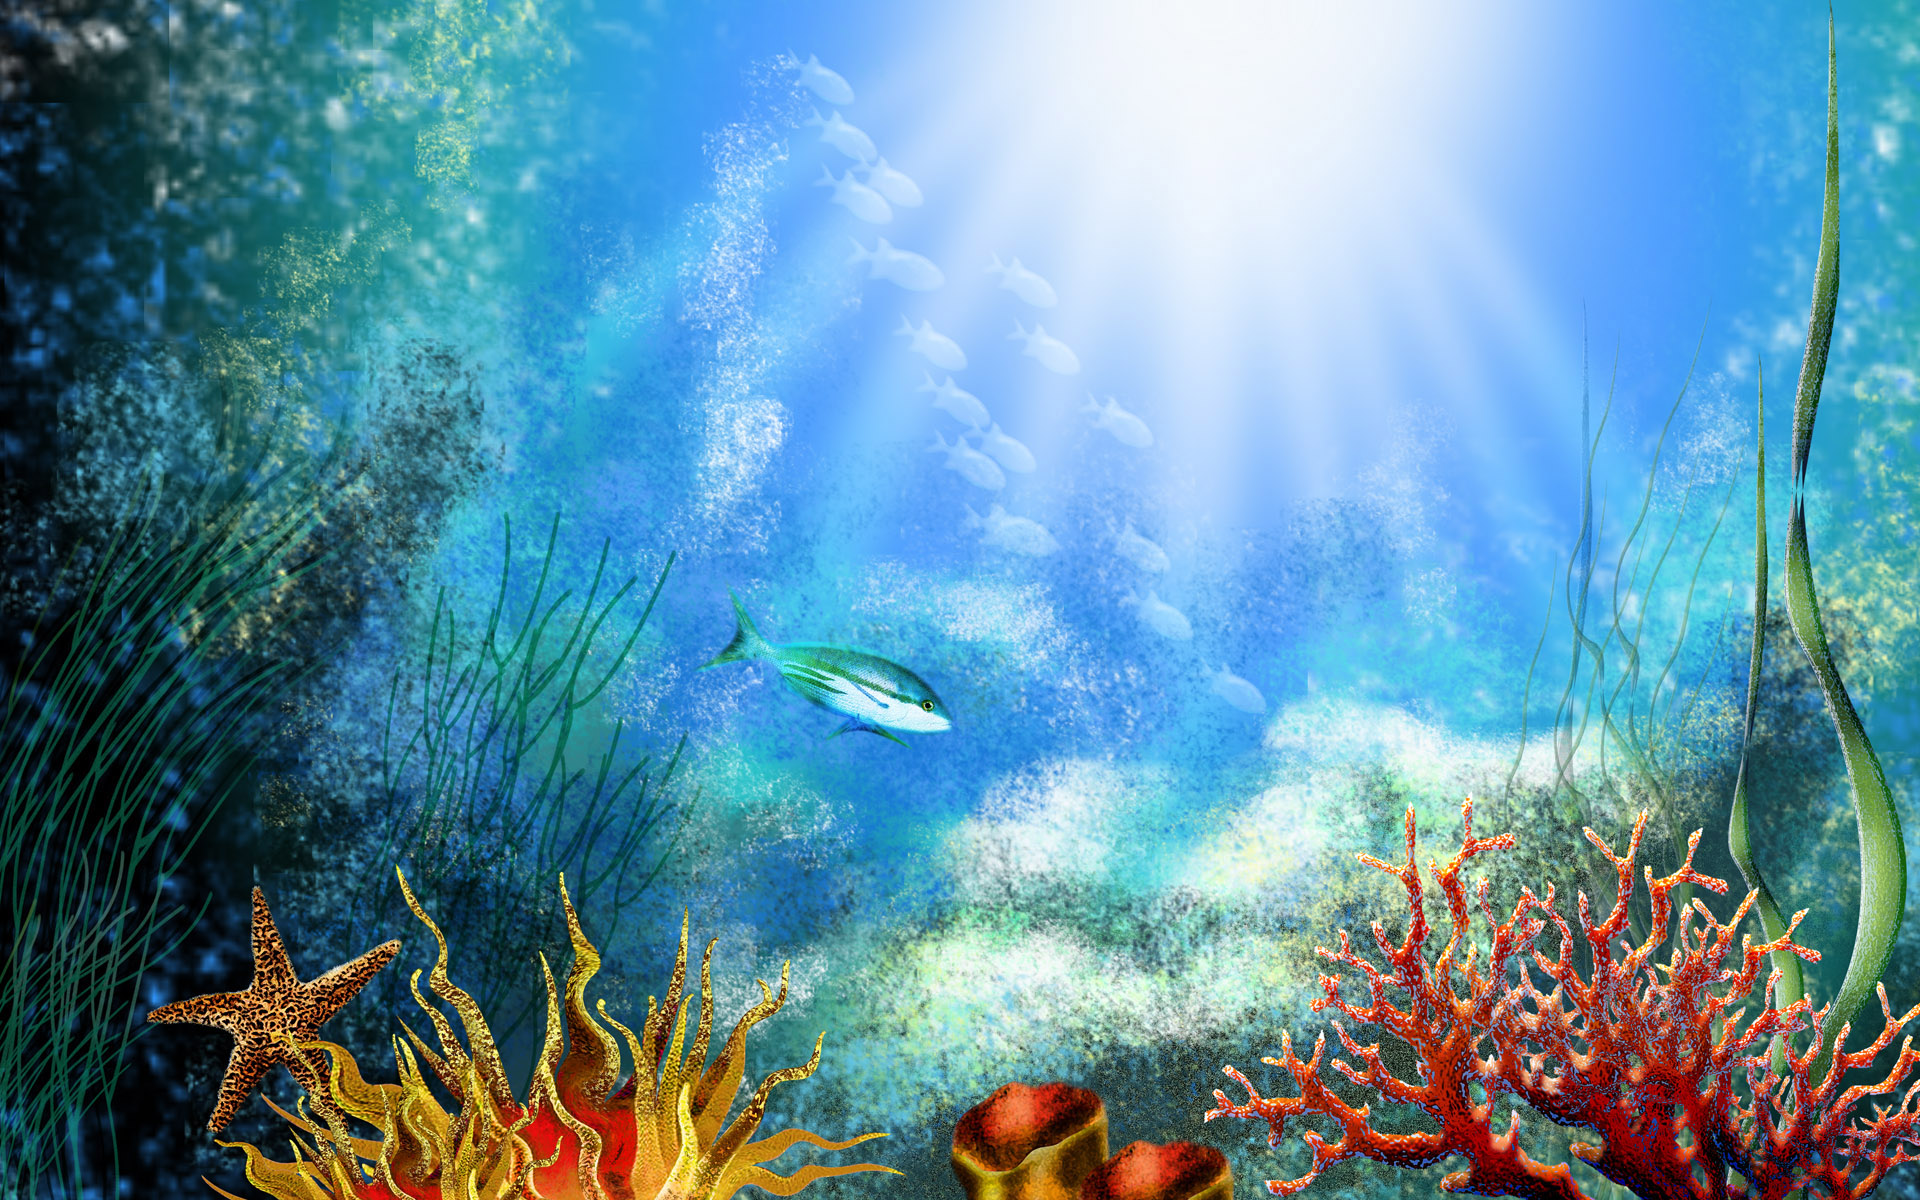 The Underwater Environment Holds An Irresistible Charm For Many Feel